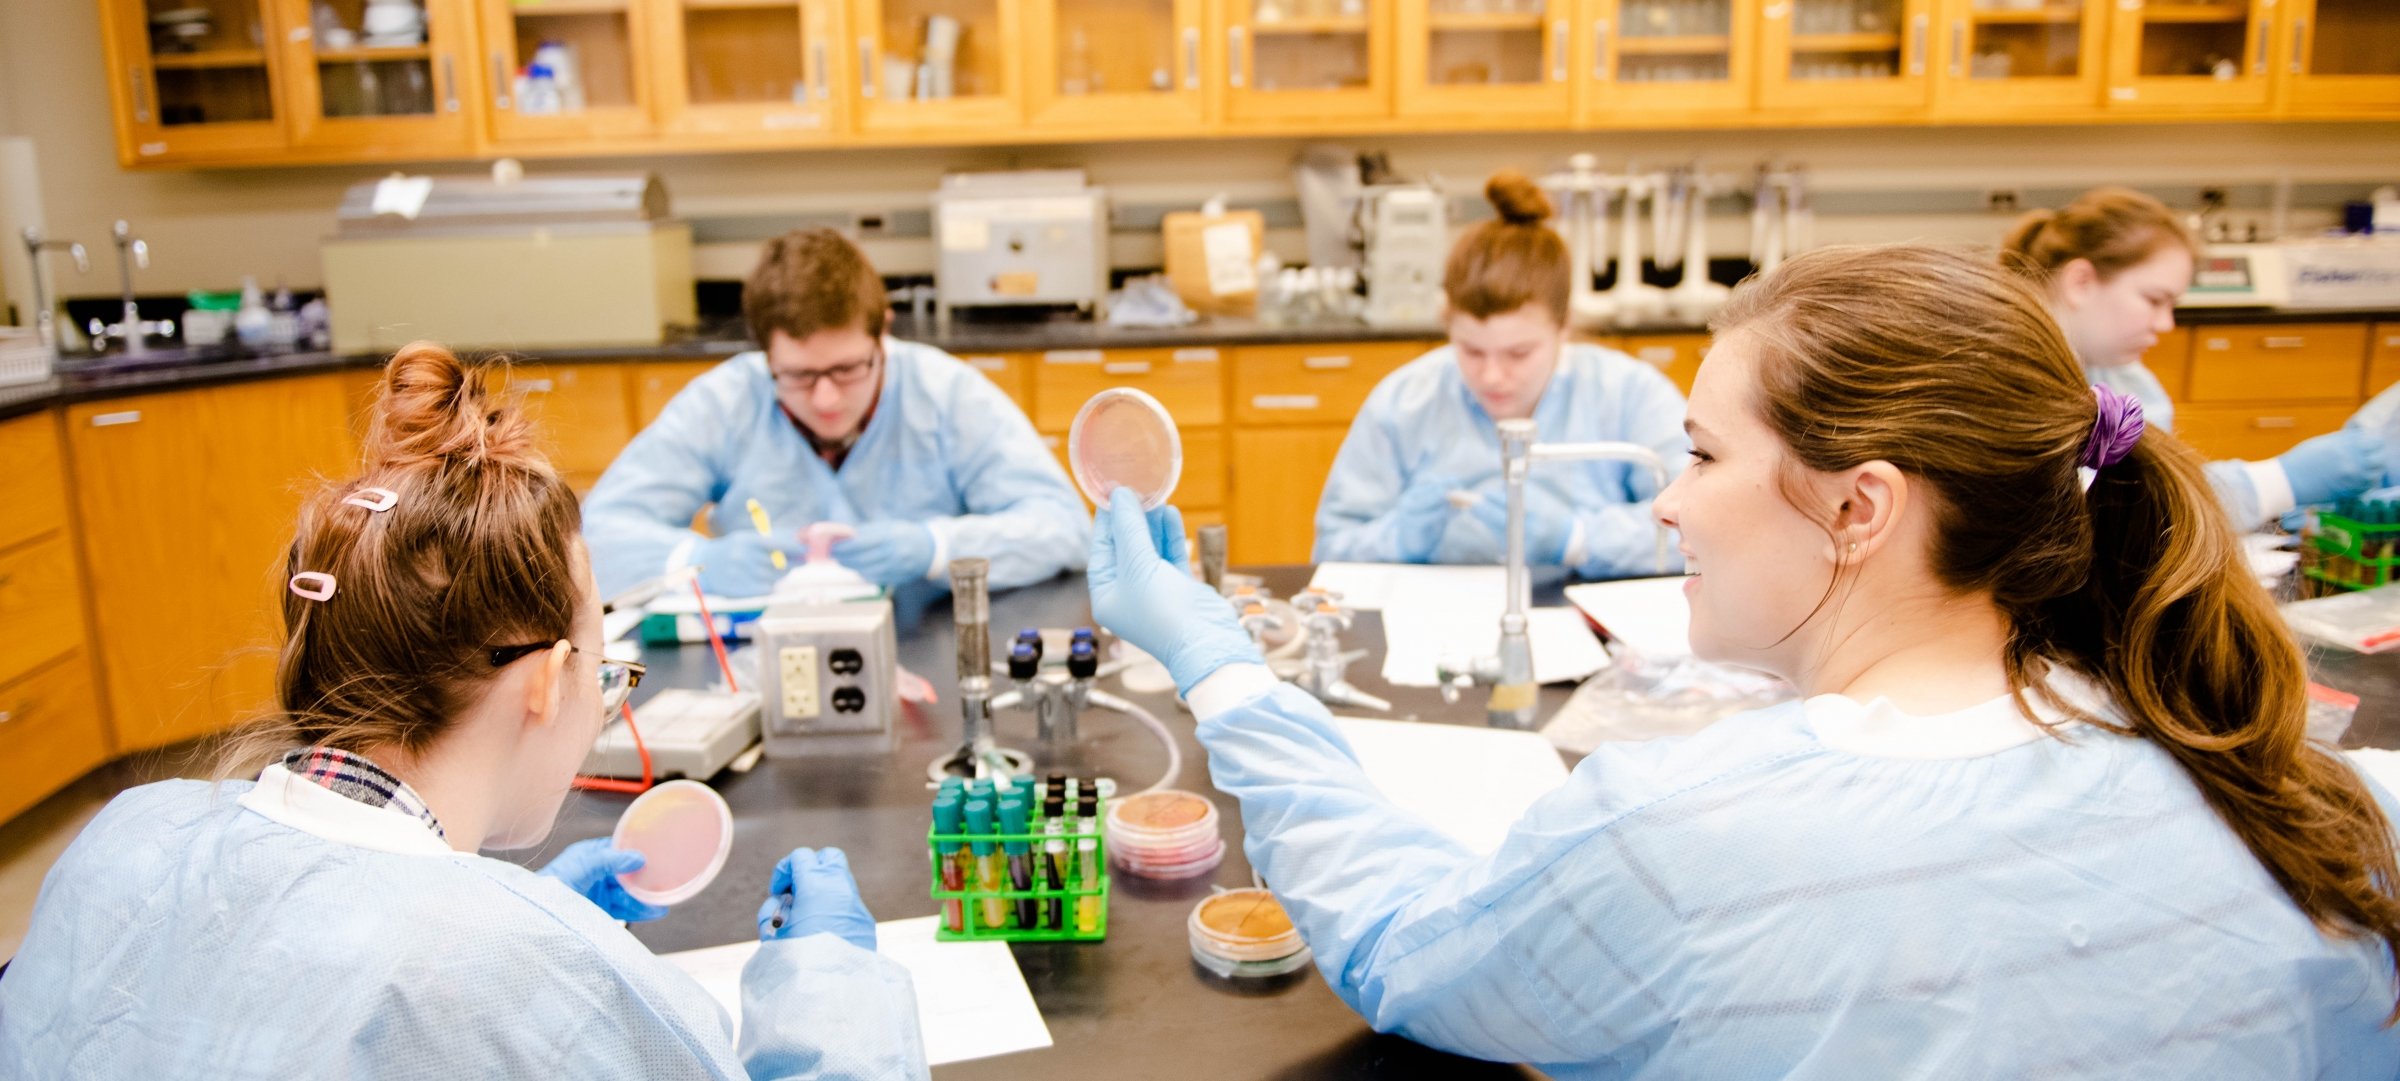 Students examining petri dishes in a lab